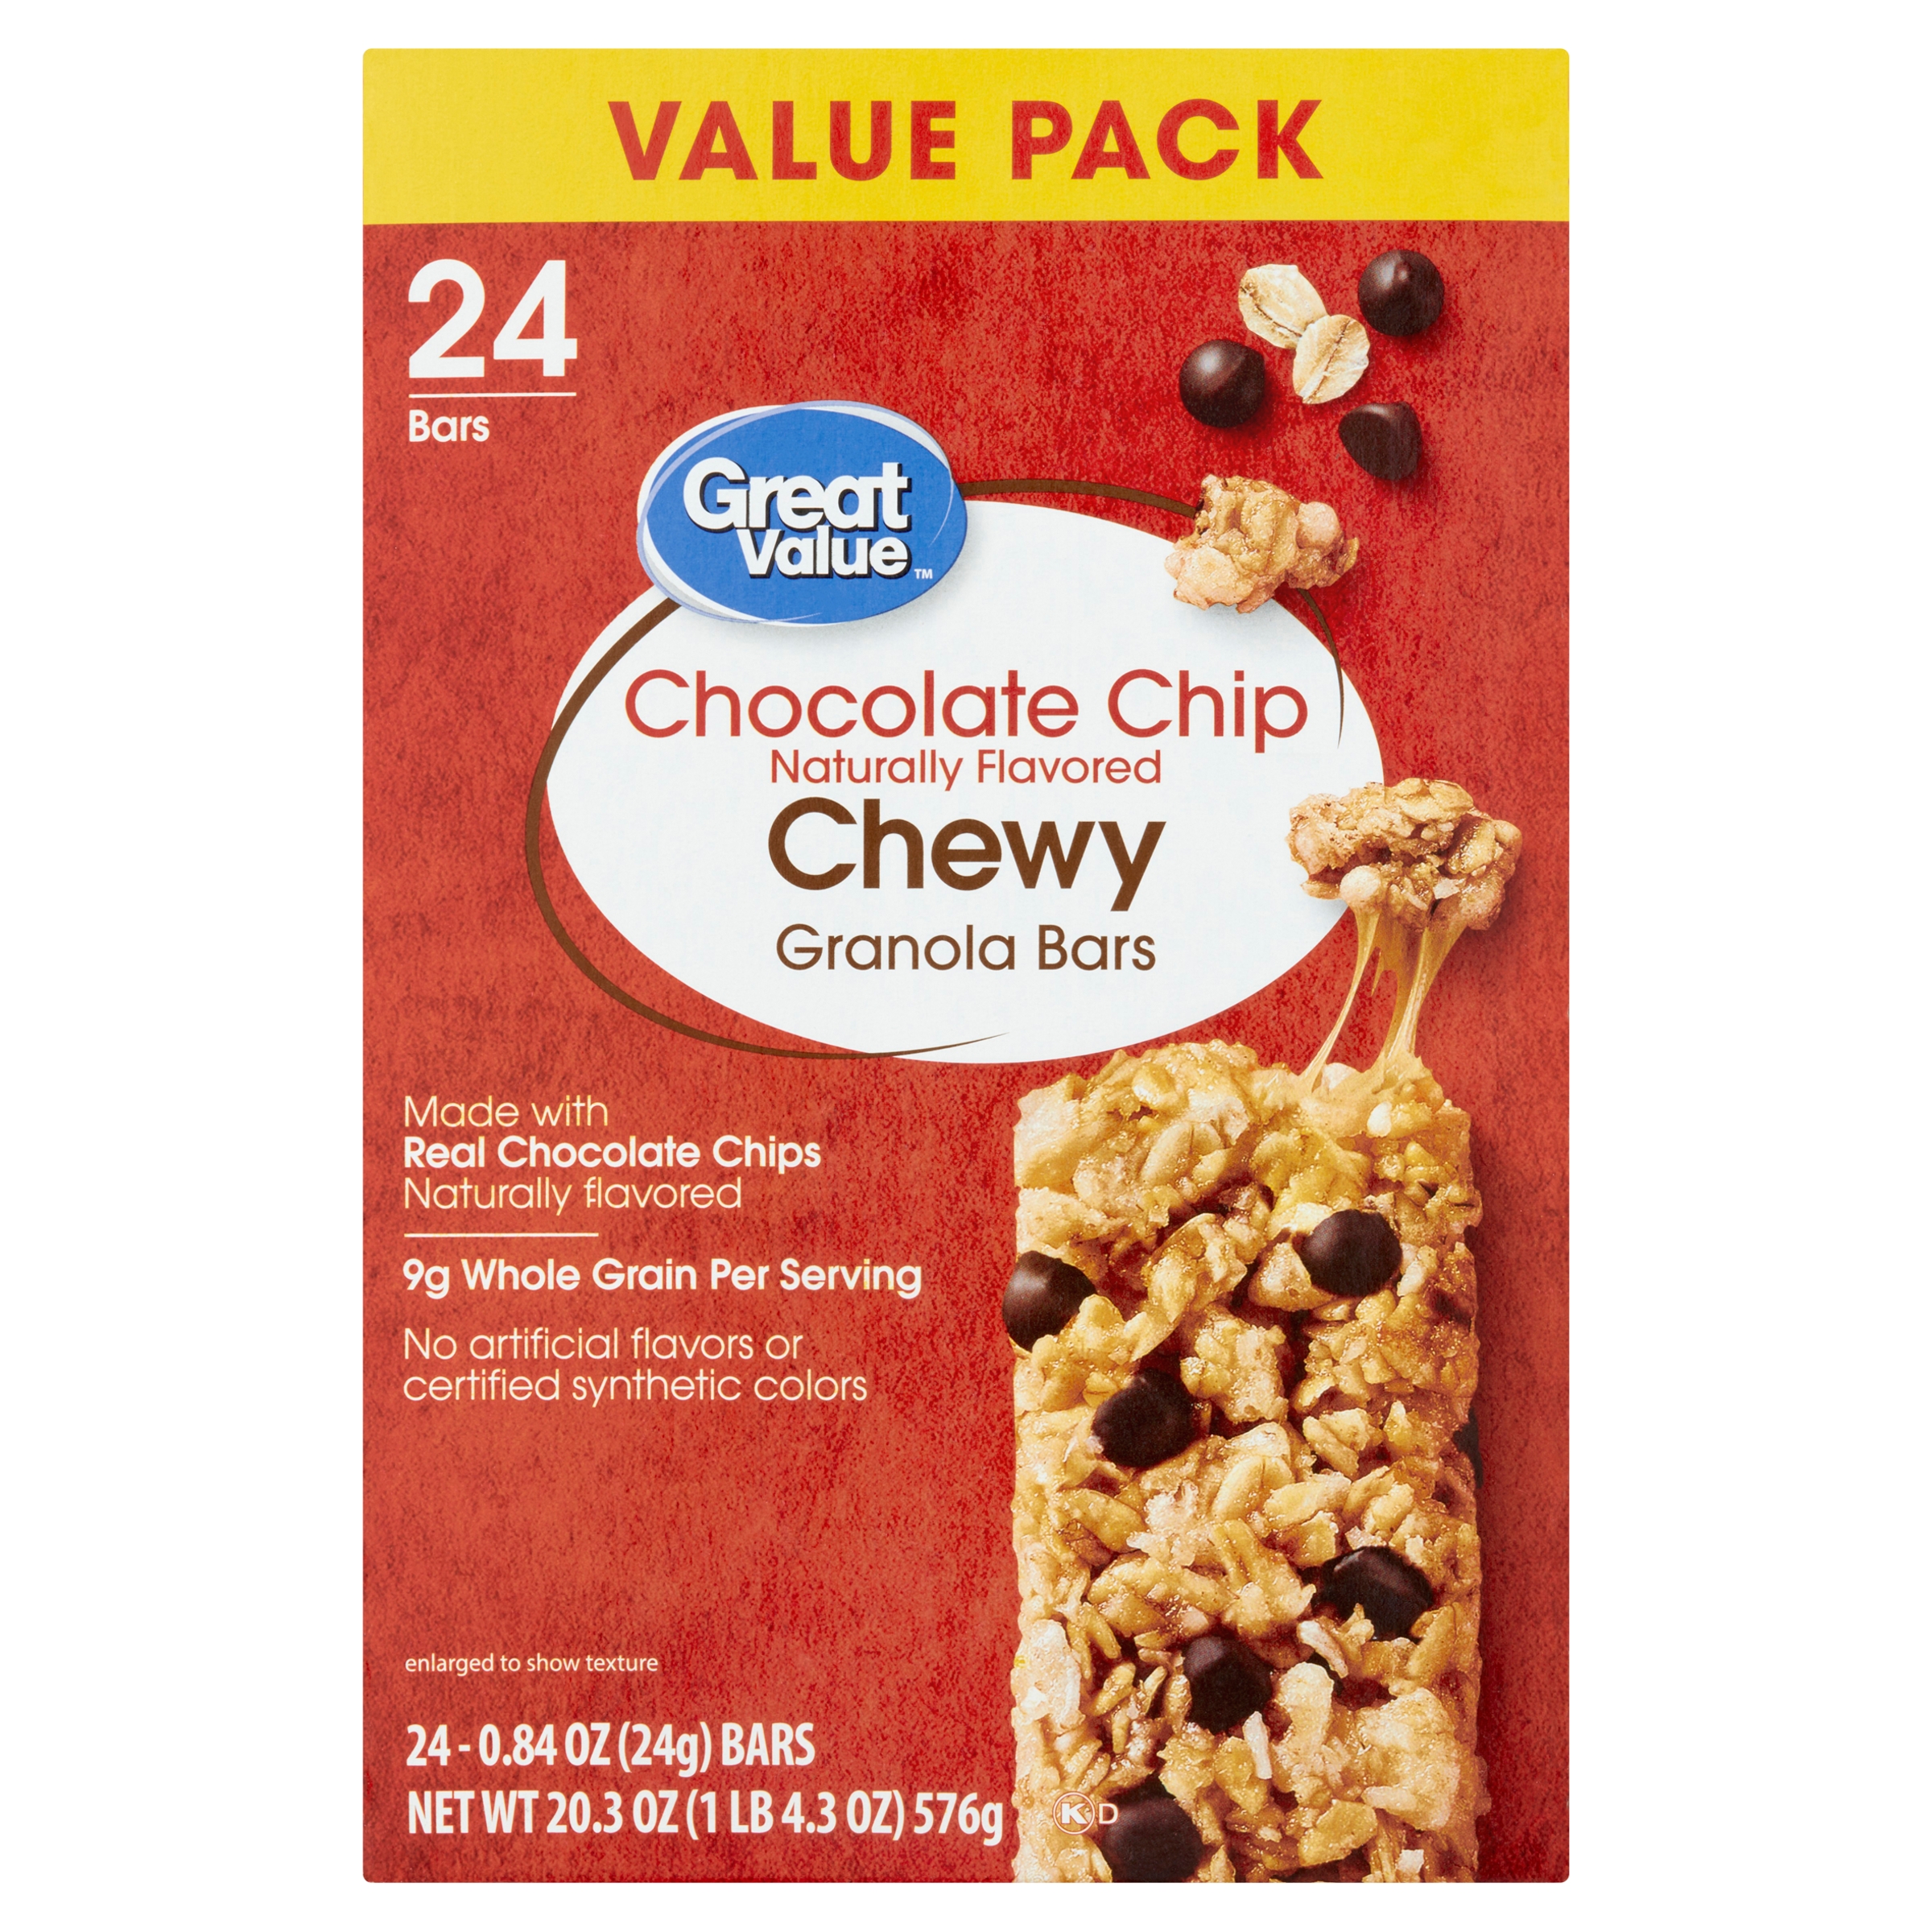 Great Value Chewy Chocolate Chunk Granola Bars, Value Pack, 20.3 oz, 24 Count - image 1 of 7